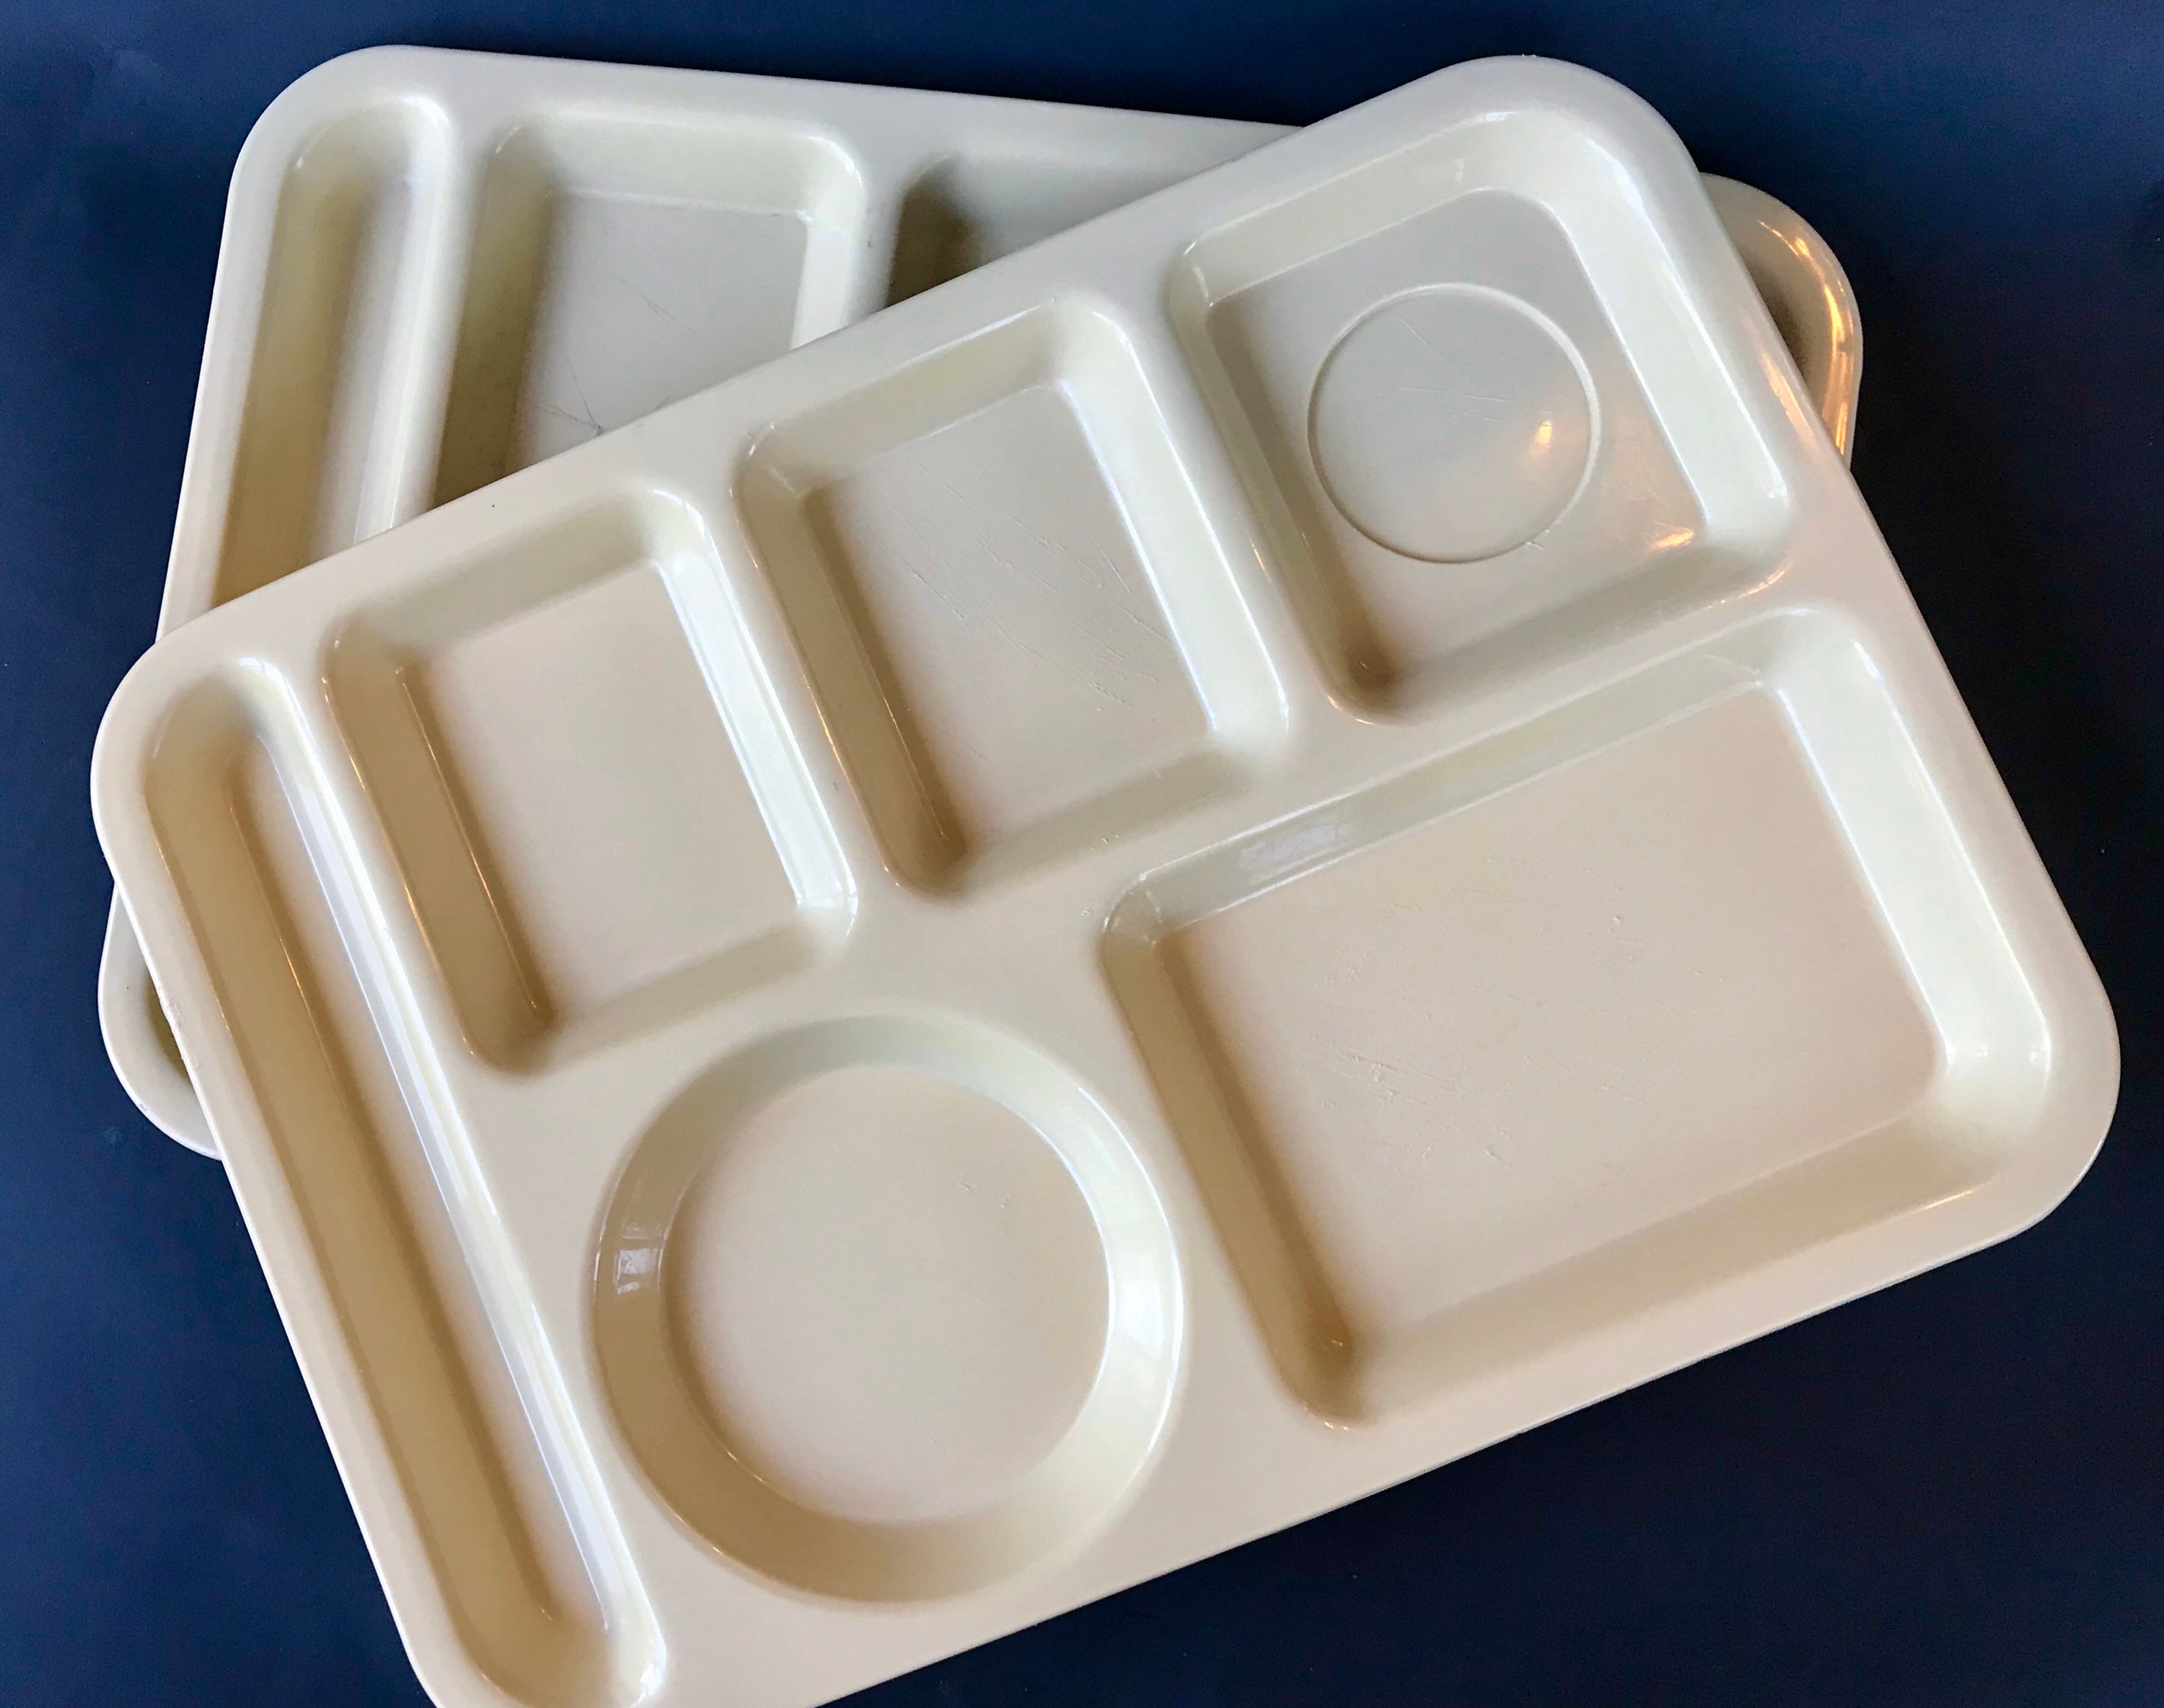 Melamine Cafeteria Trays, Vintage Cambro Trays, Cambro Melamine Melmac  Trays, School Lunch Trays, Beige Colored Melamine Made in USA 